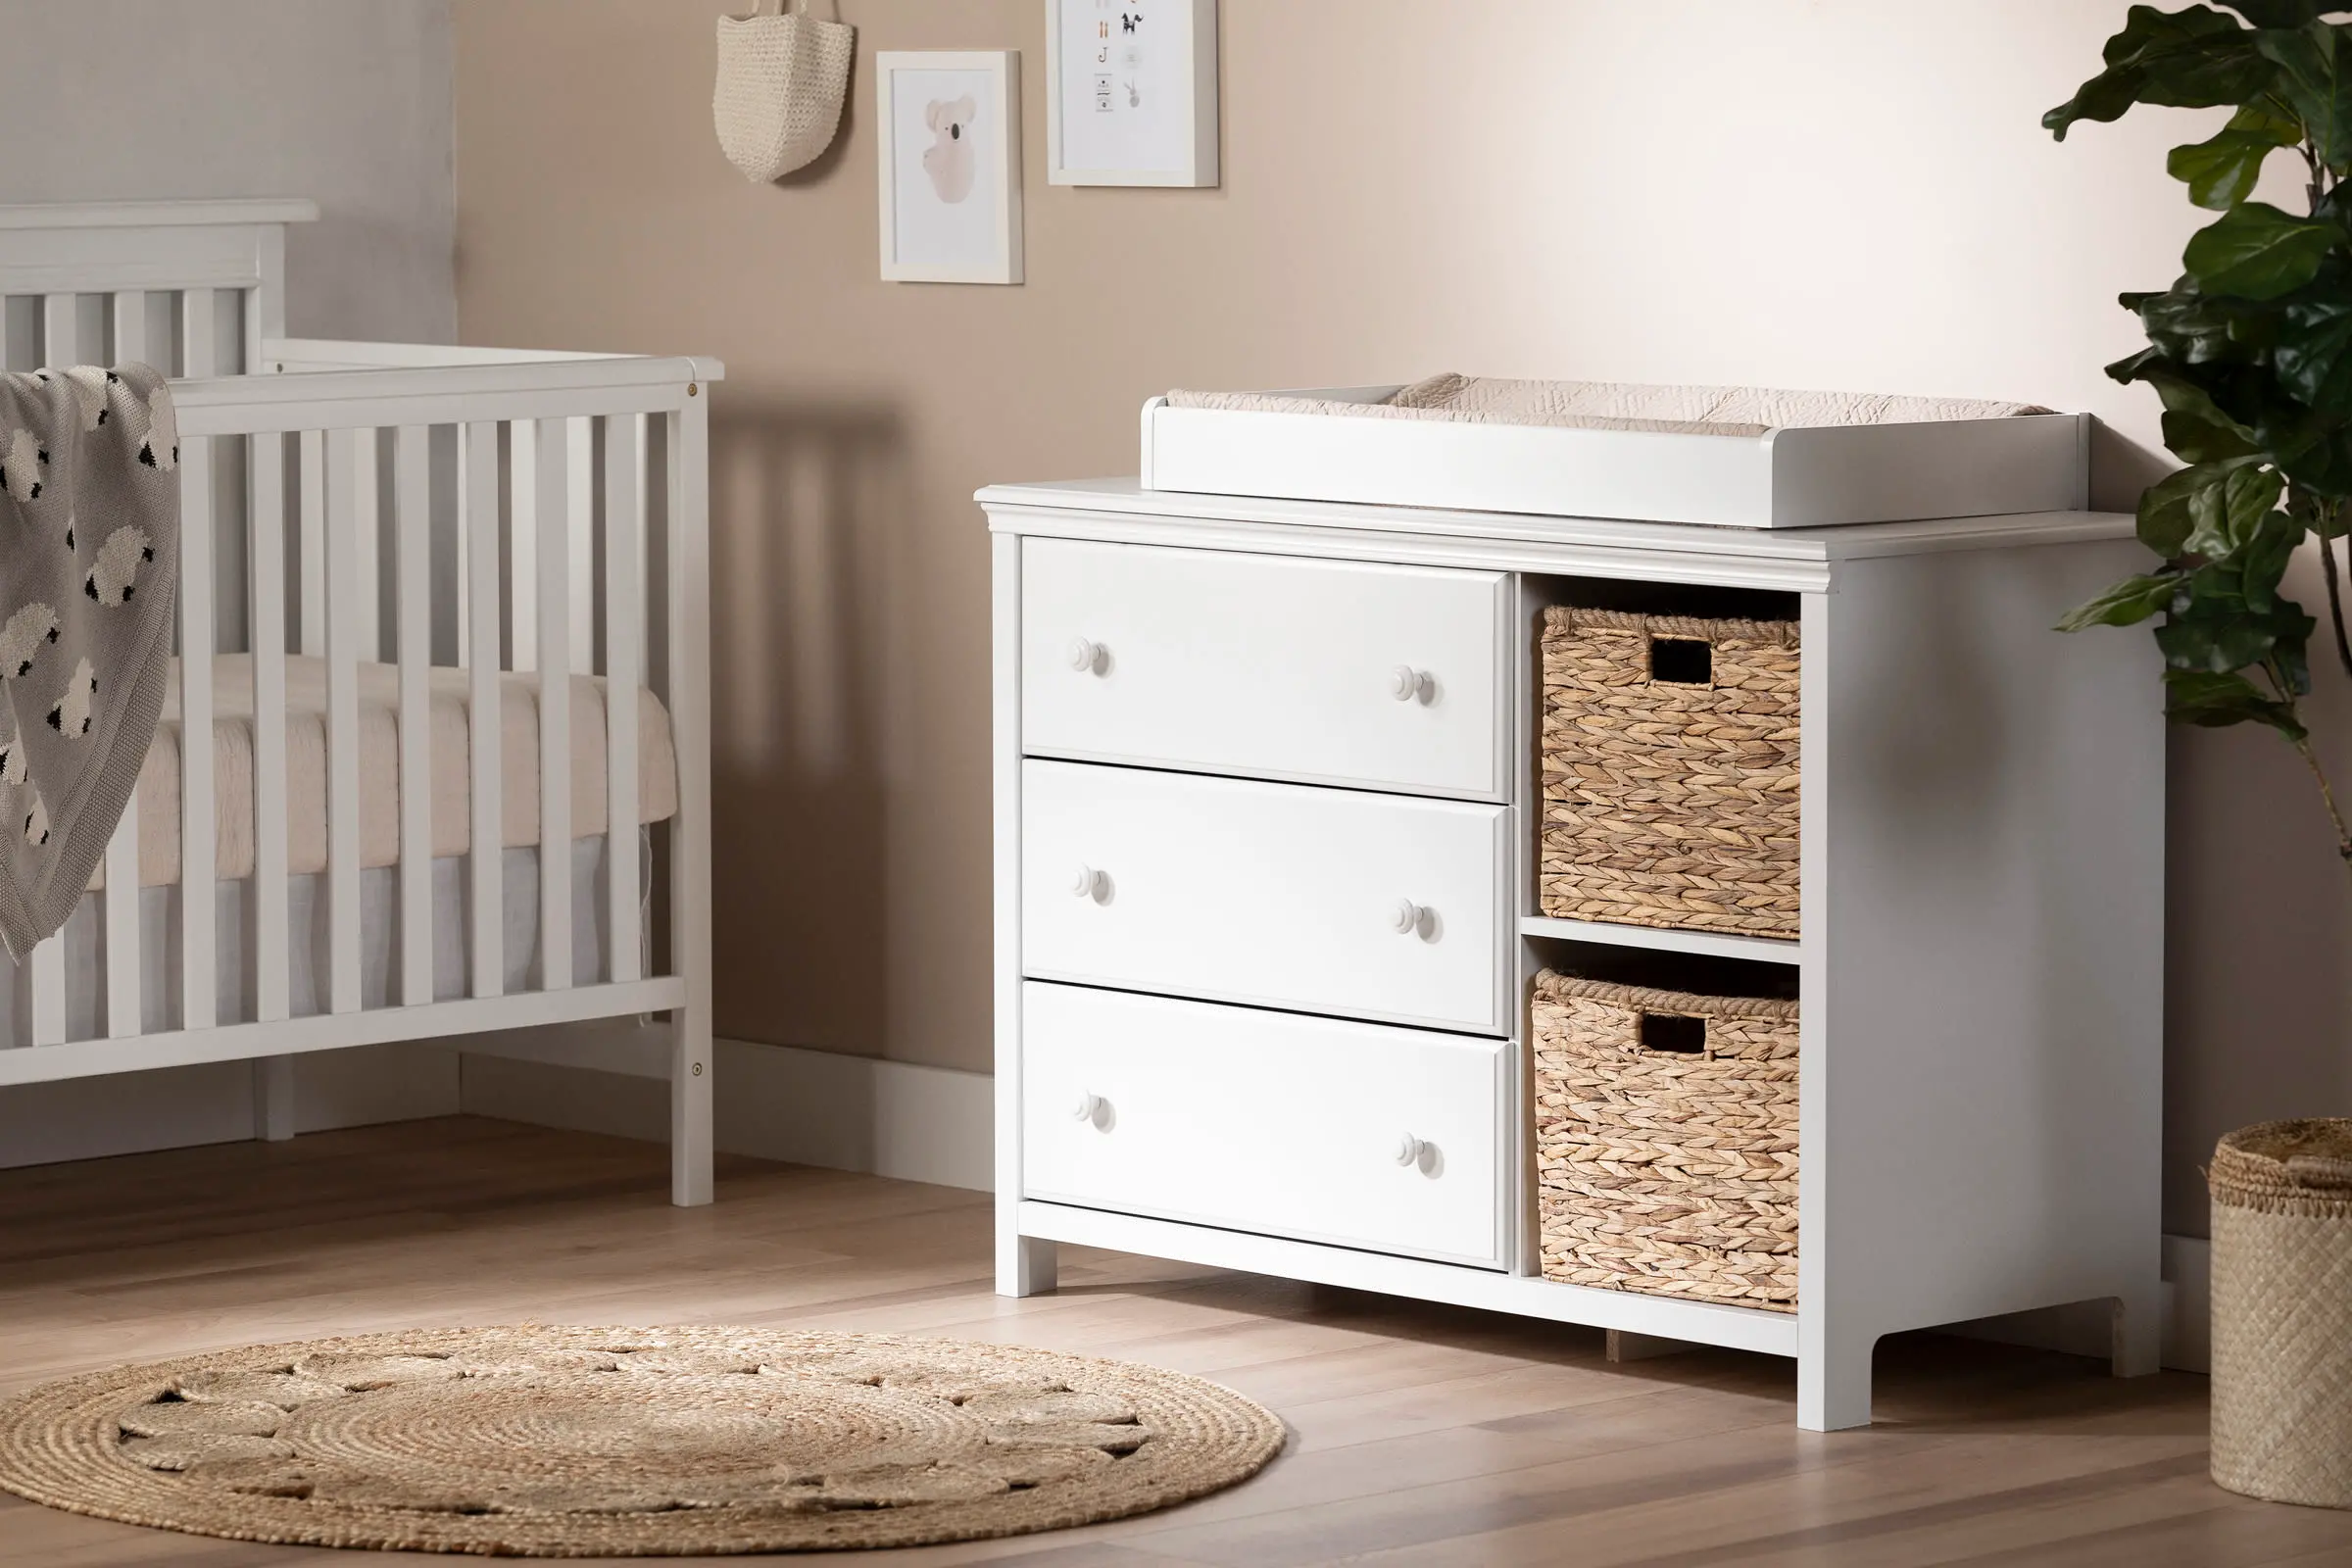 Cotton Candy White Changing Table - South Shore